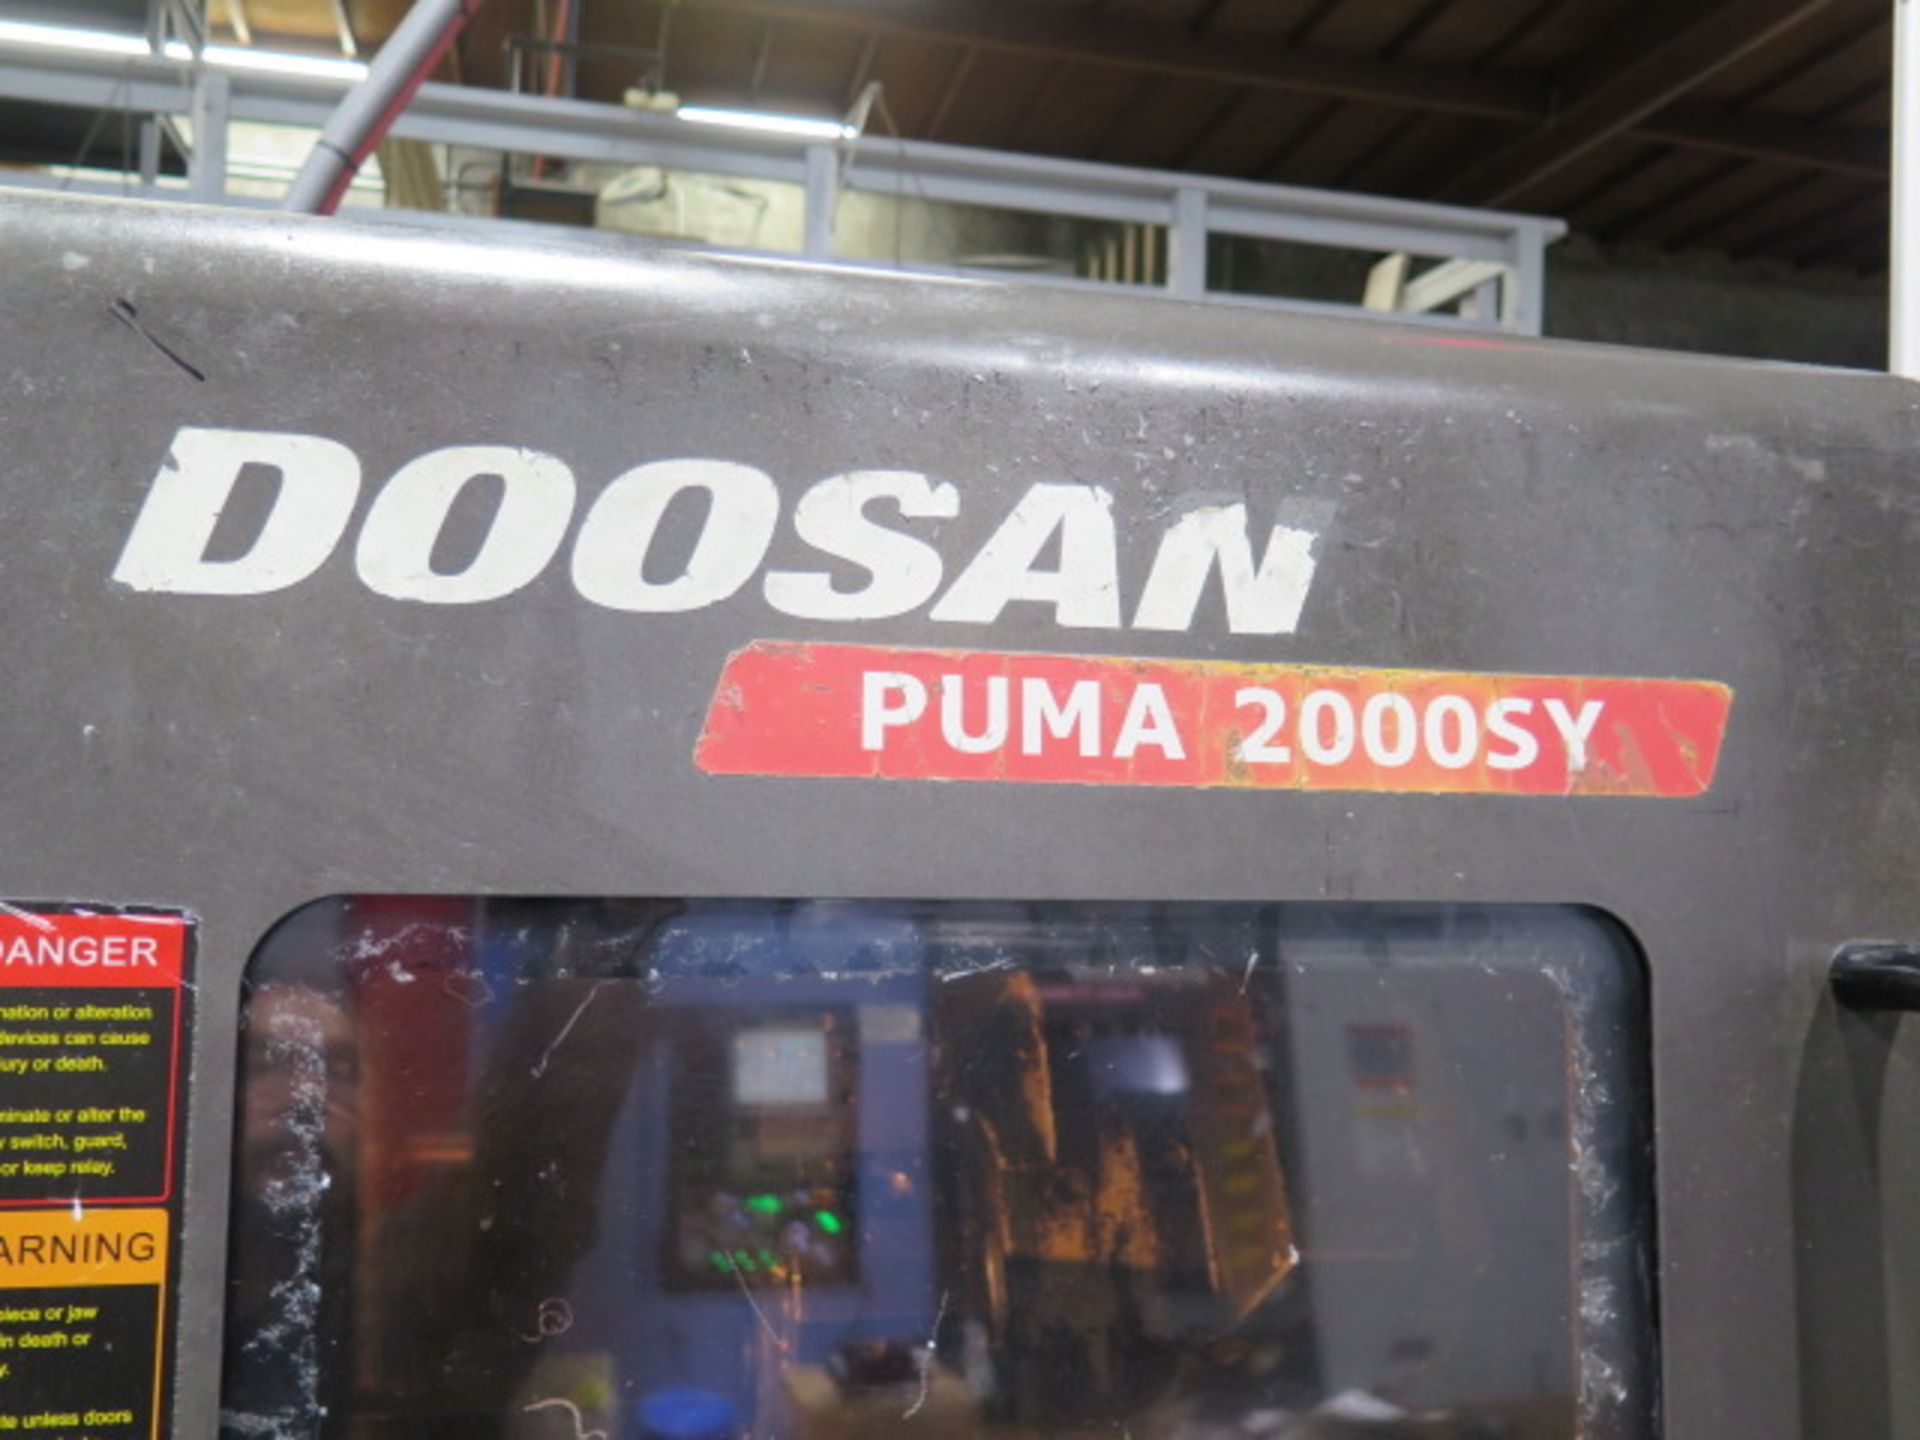 2007 Doosan PUMA 2000SY Twin Spindle CNC Turning Center s/n P200SY0835 w/ Fanuc 18i-TB, SOLD AS IS - Image 19 of 21